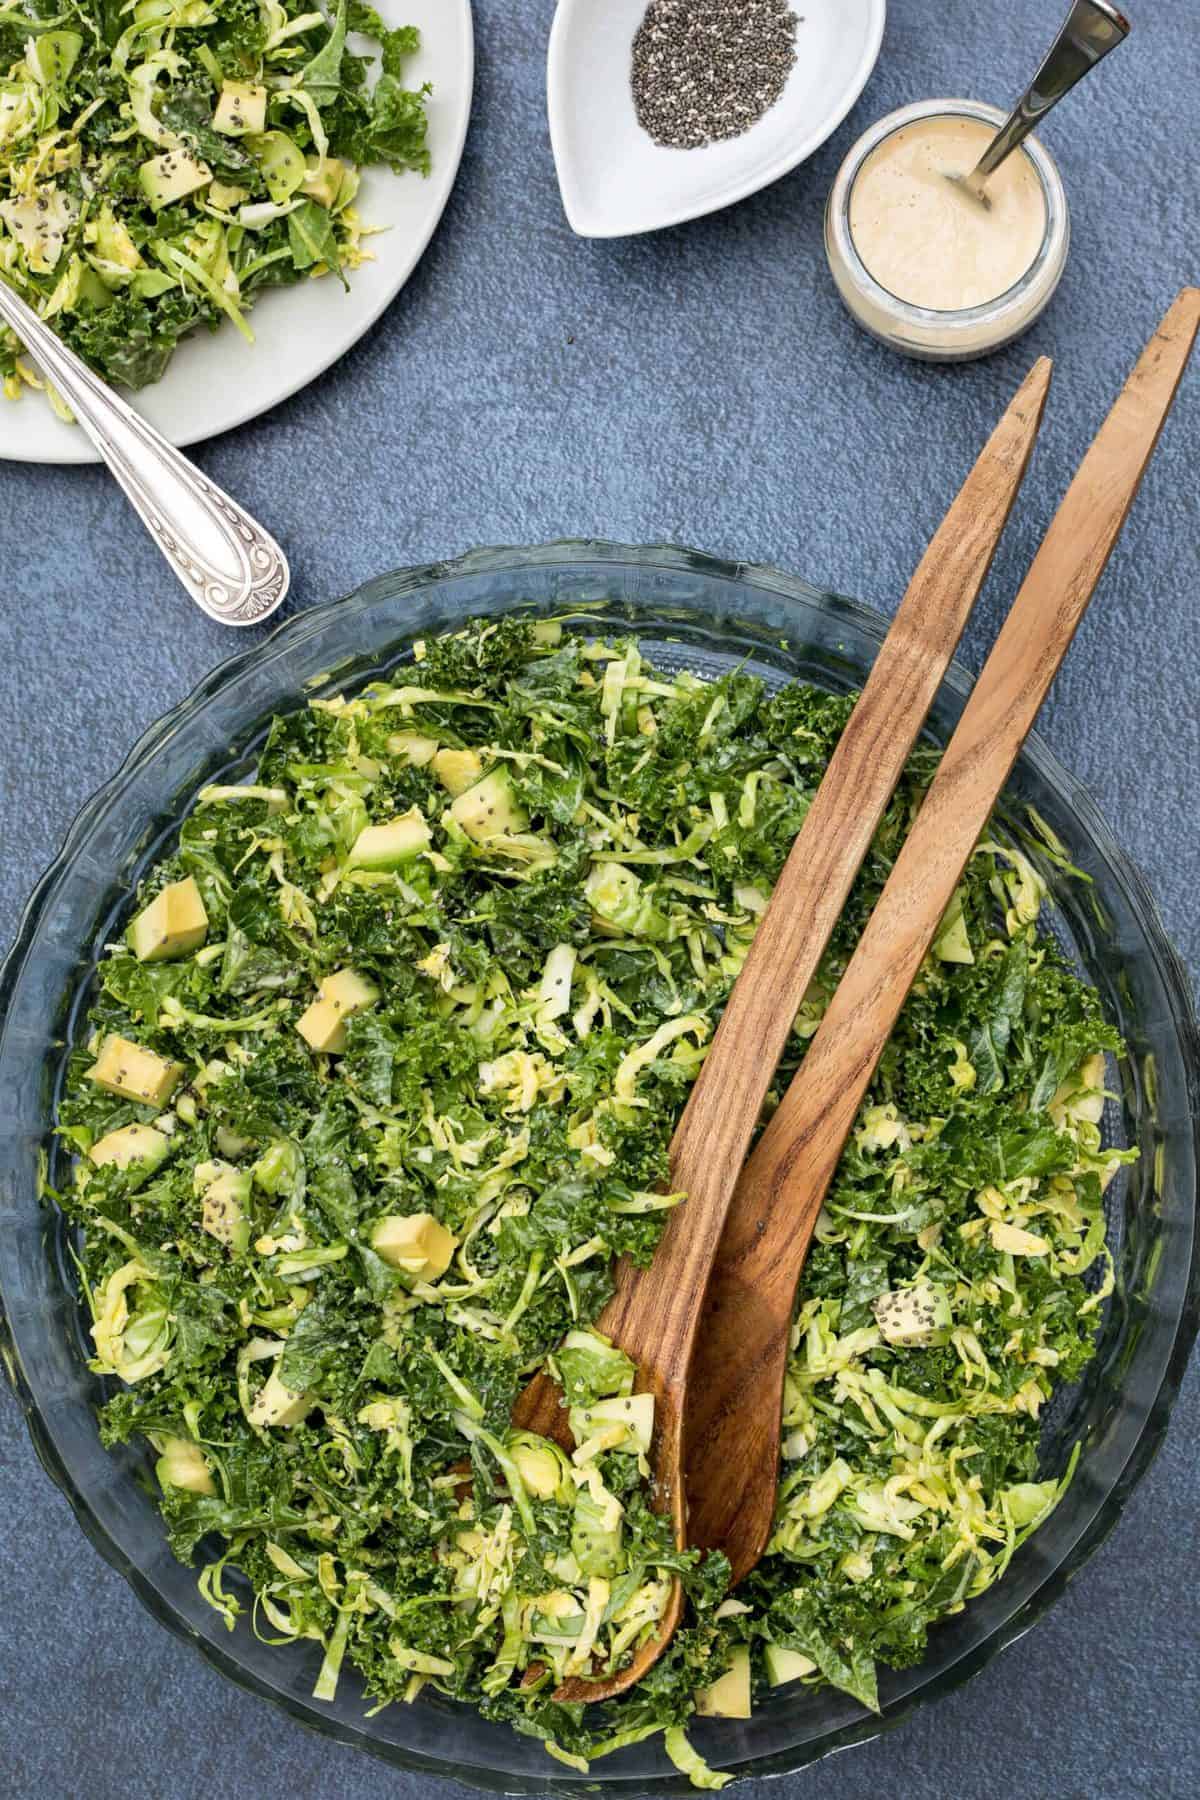 Overhead view of a bowl full of kale and Brussels sprouts salad with miso-ginger dressing, a wooden serving spoon, and a small plate of salad.